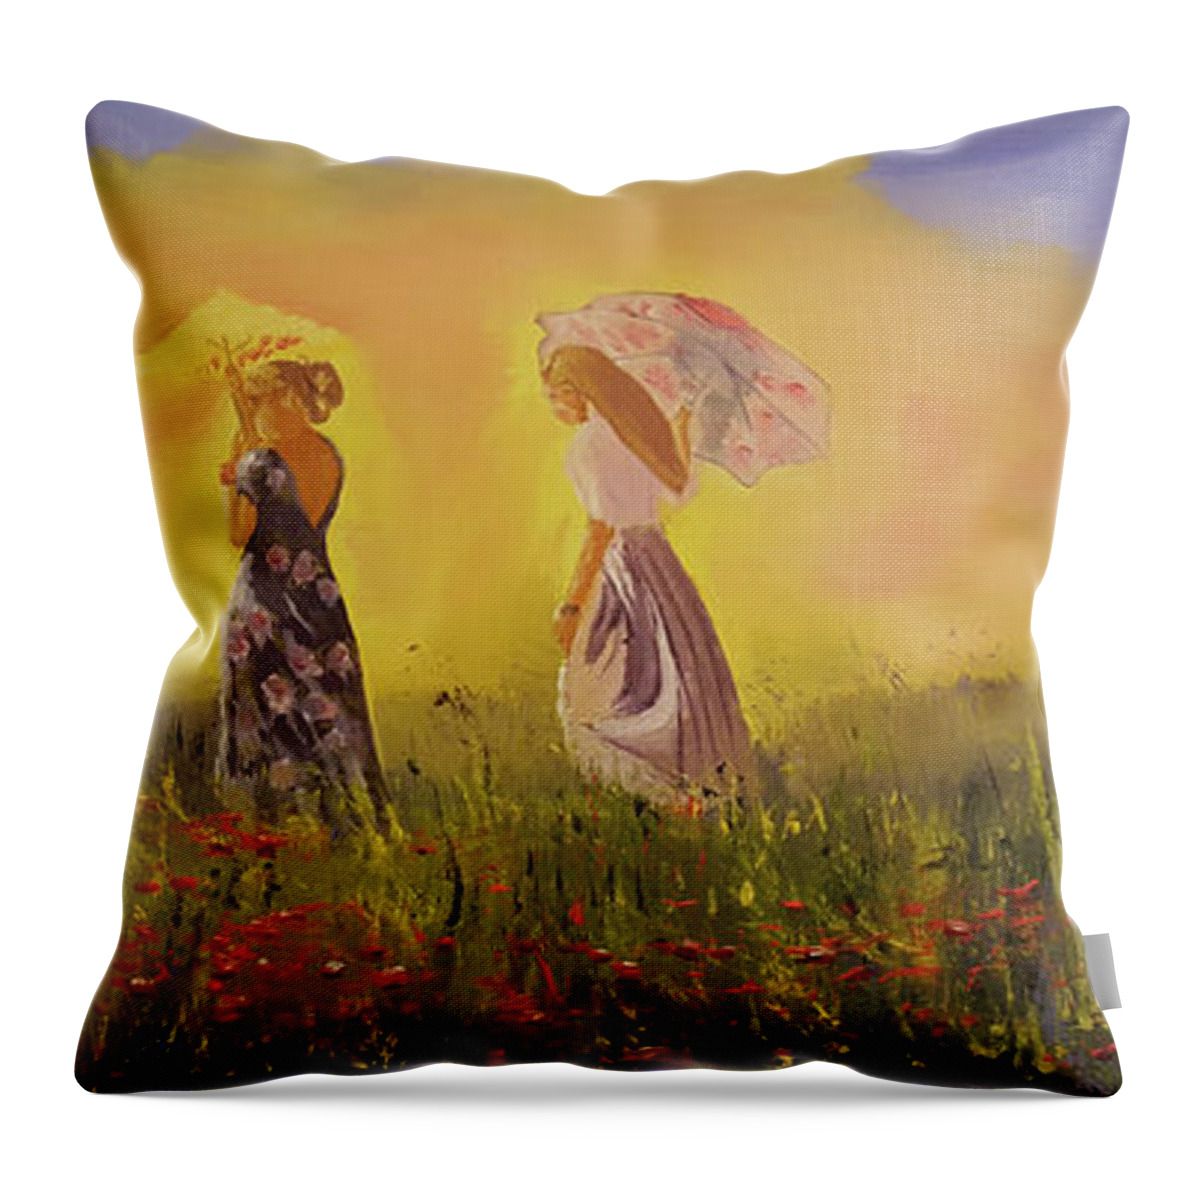  Impressionist Throw Pillow featuring the painting Two Friends Walking In The Field by Russell Collins